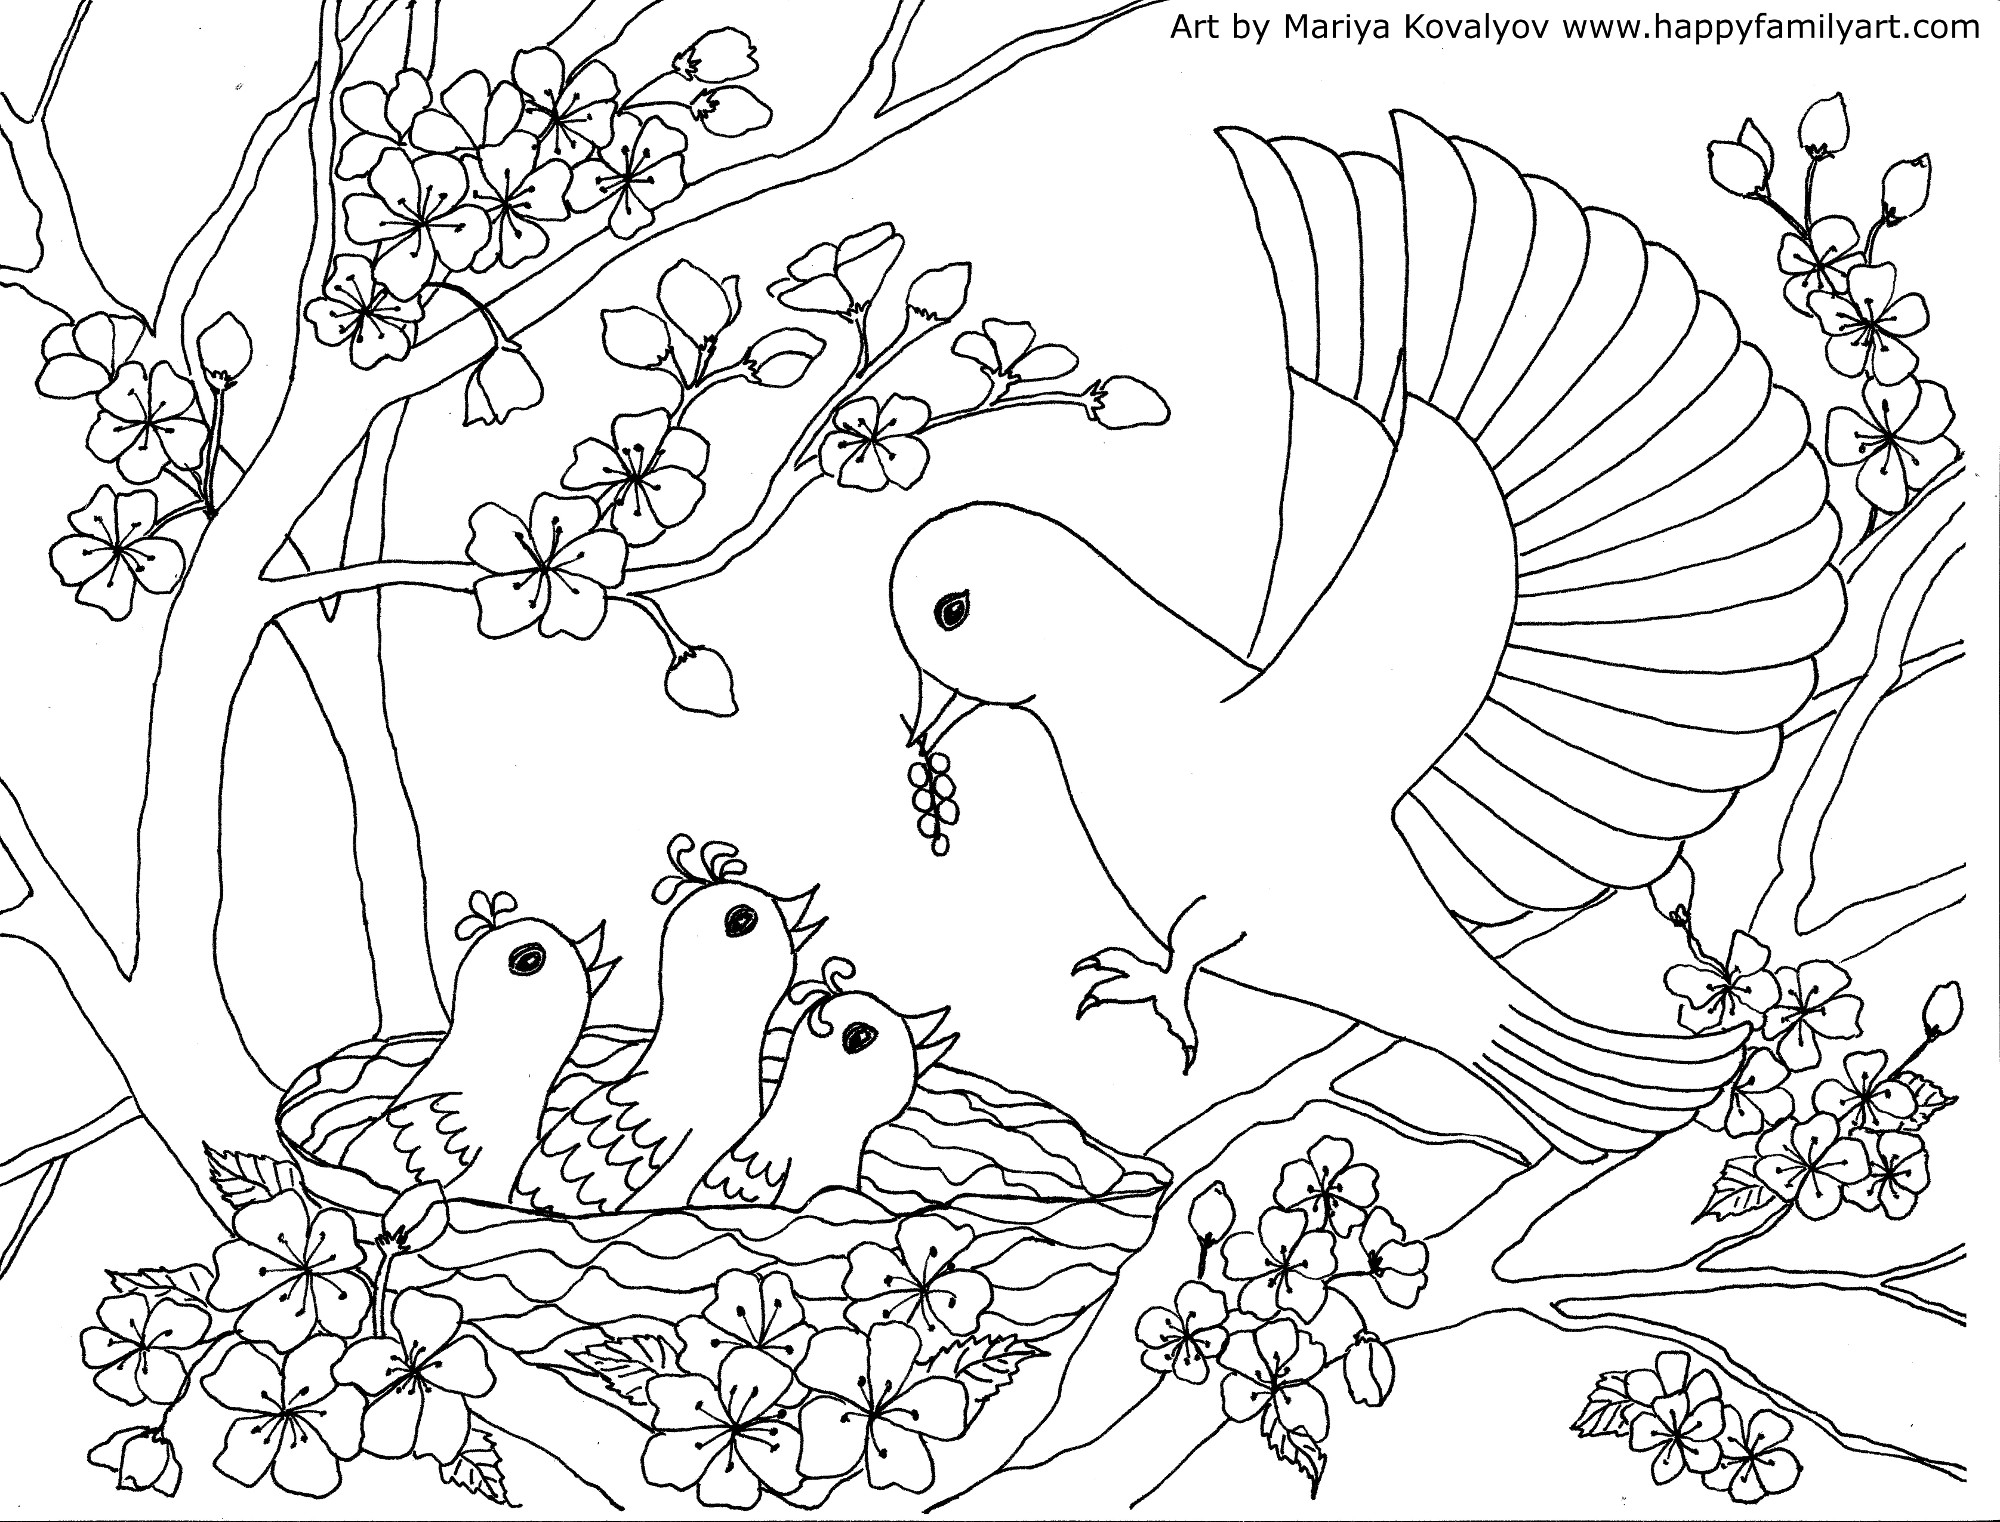 Flag Of Honduras Coloring Page Honduras Coloring Pages At Getdrawings Free For Personal Use